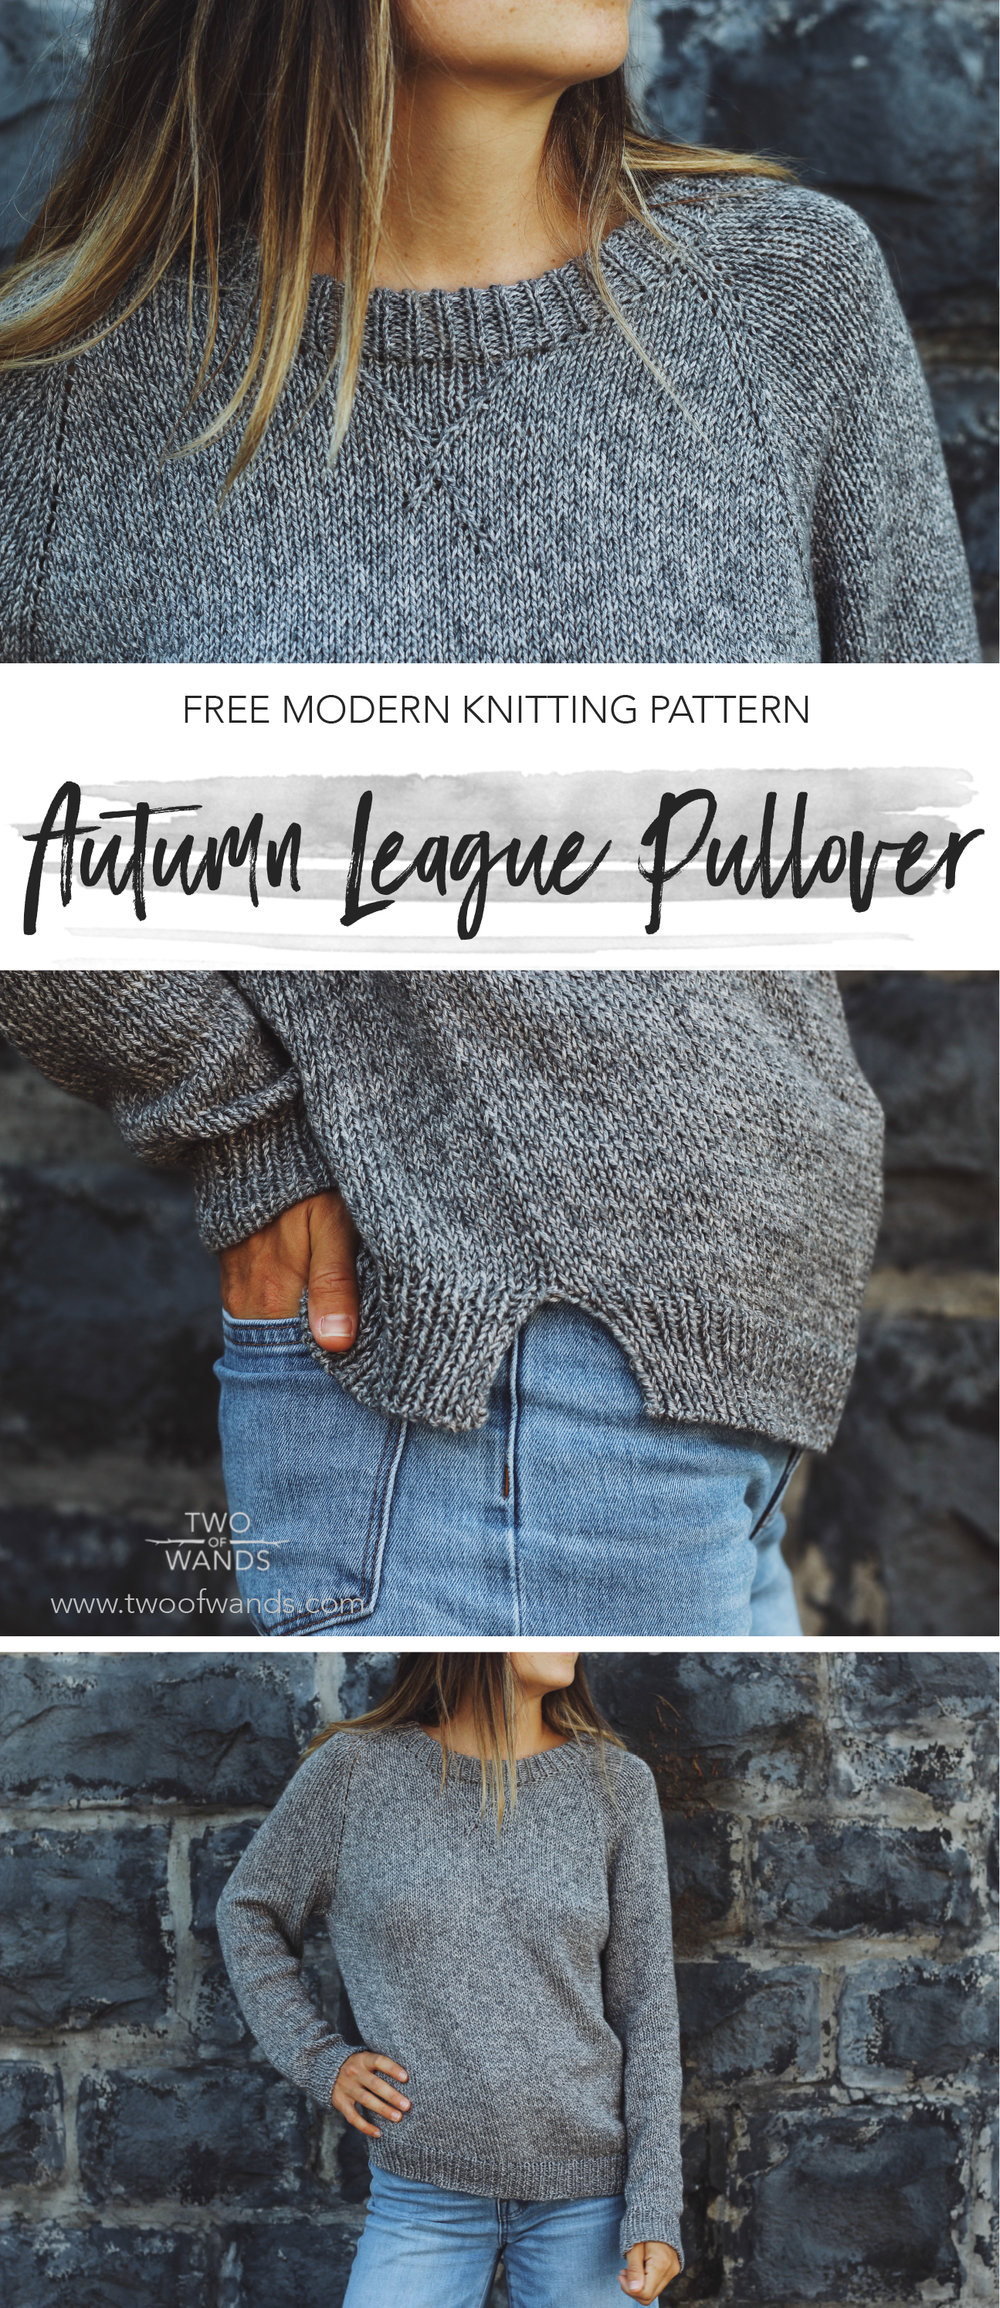 Autumn League Pullover pattern by Two of Wands